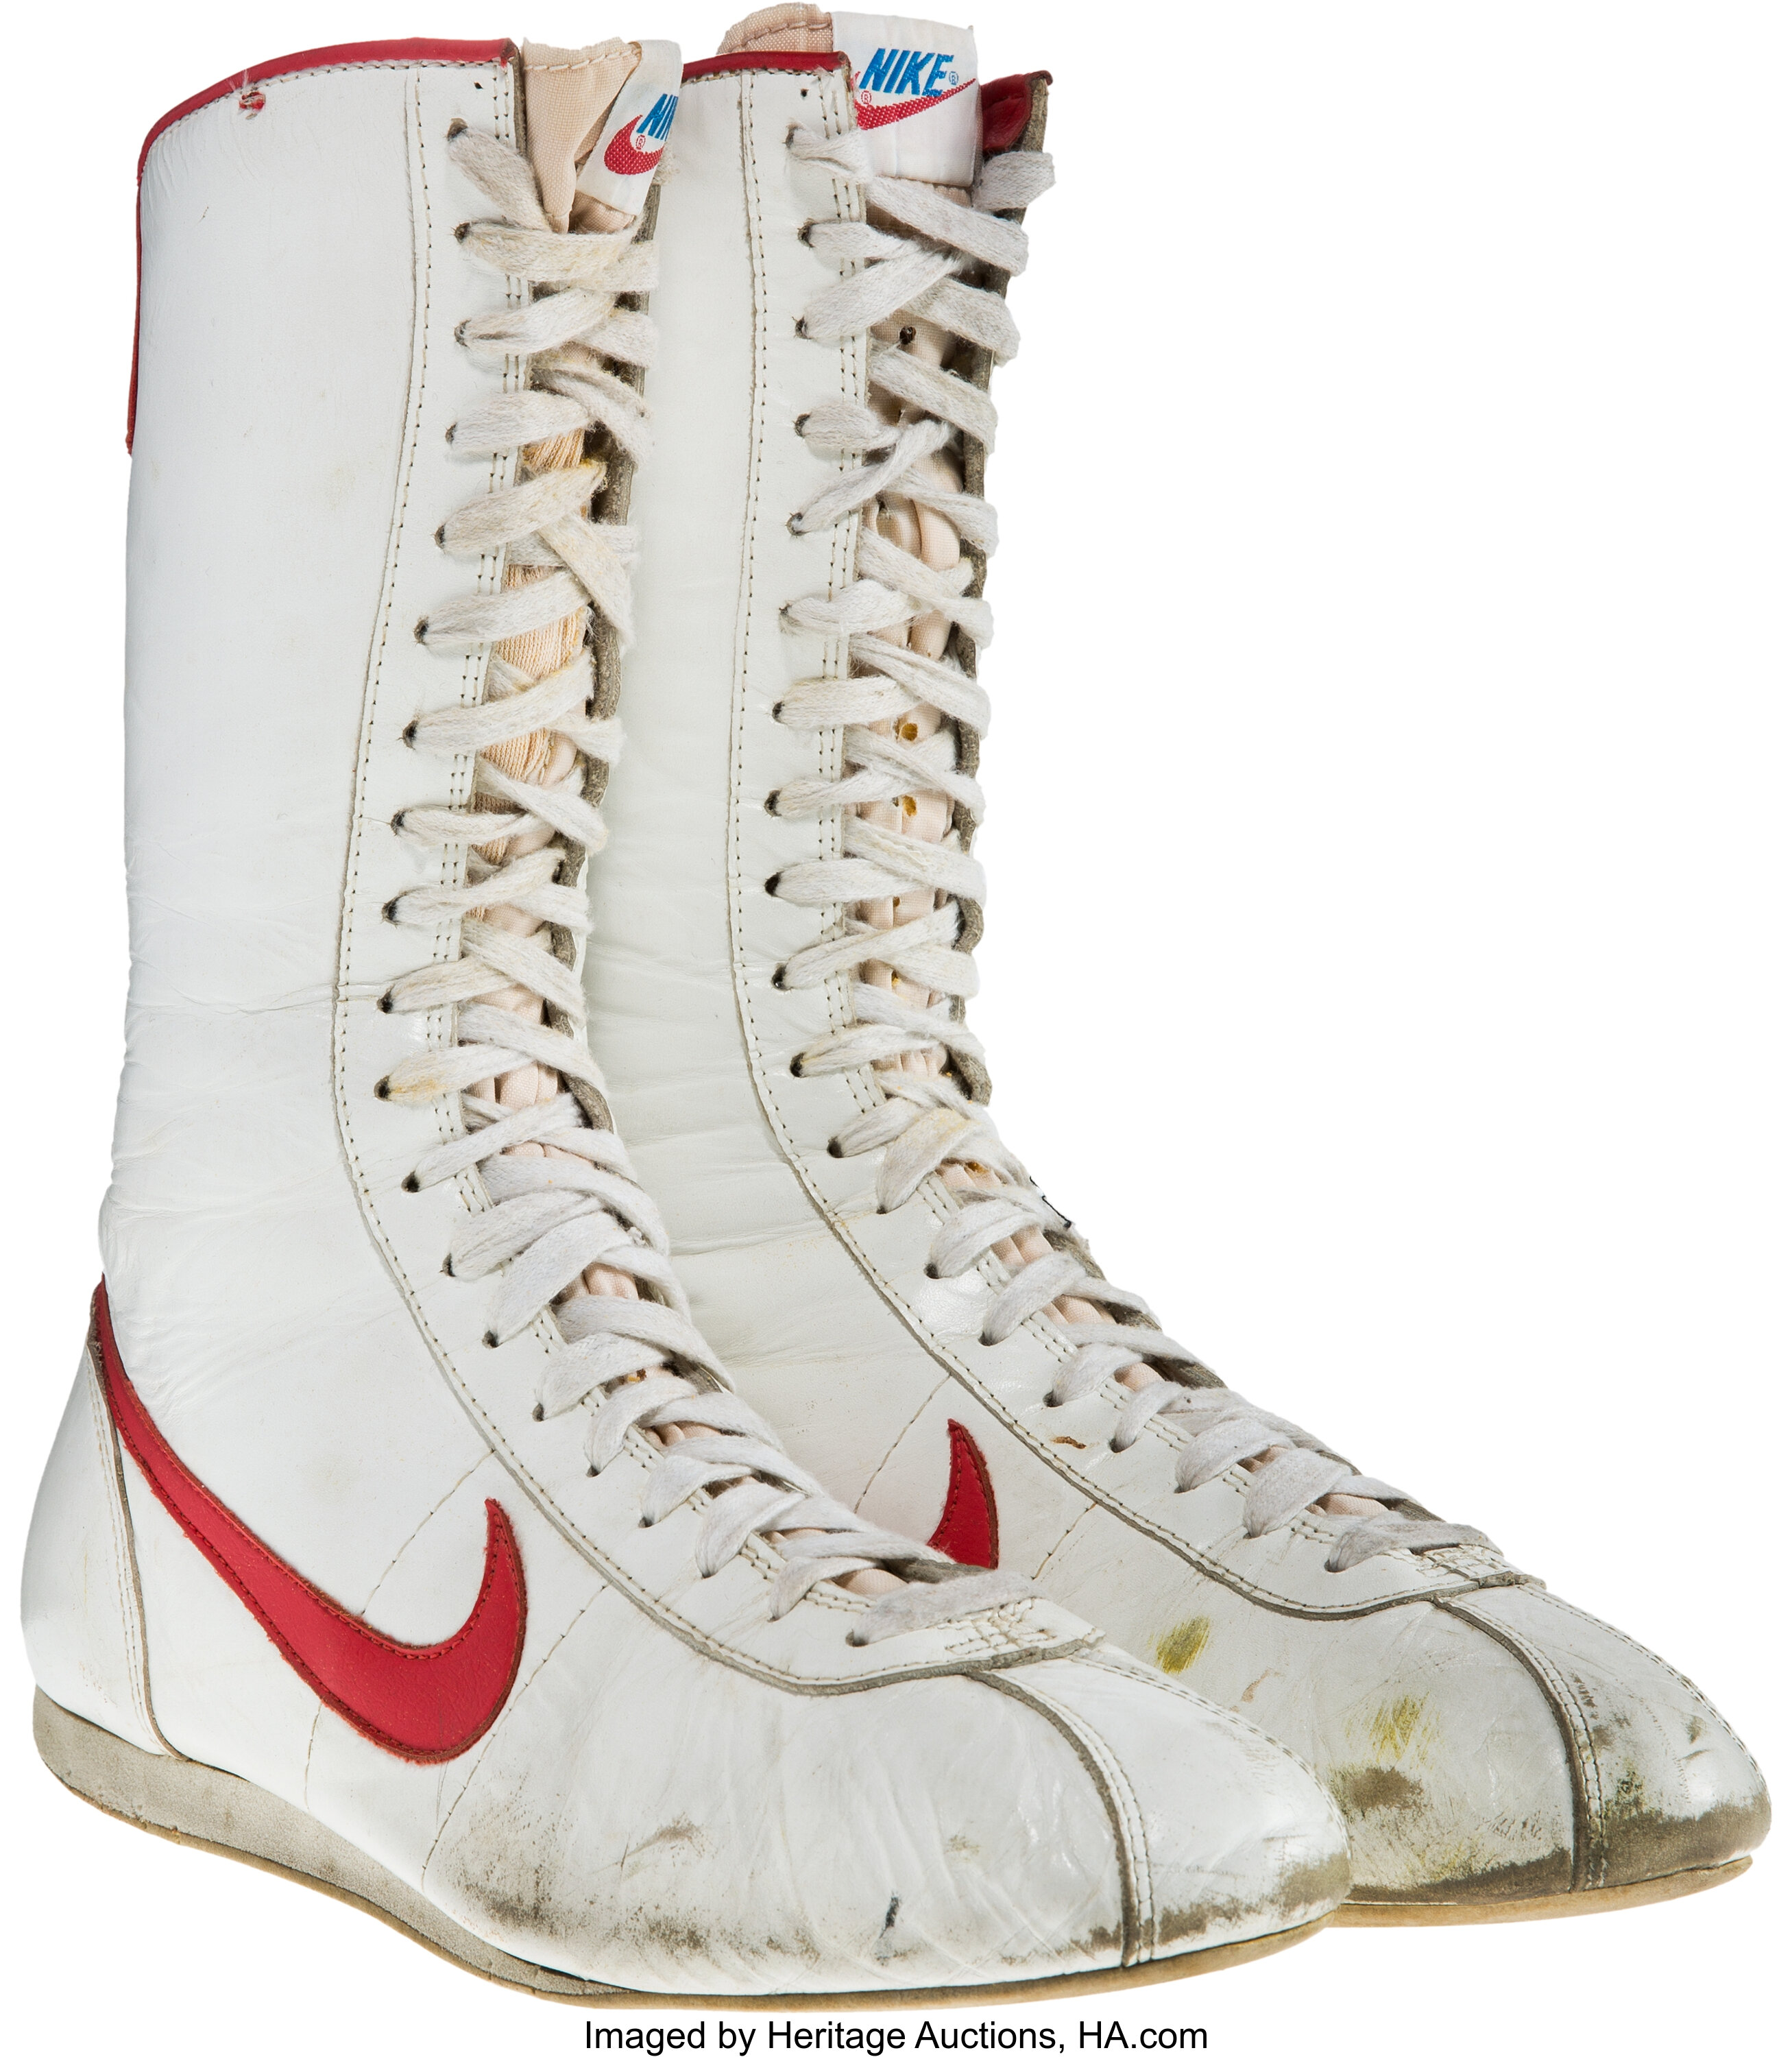 A Pair of Boxing Shoes from 